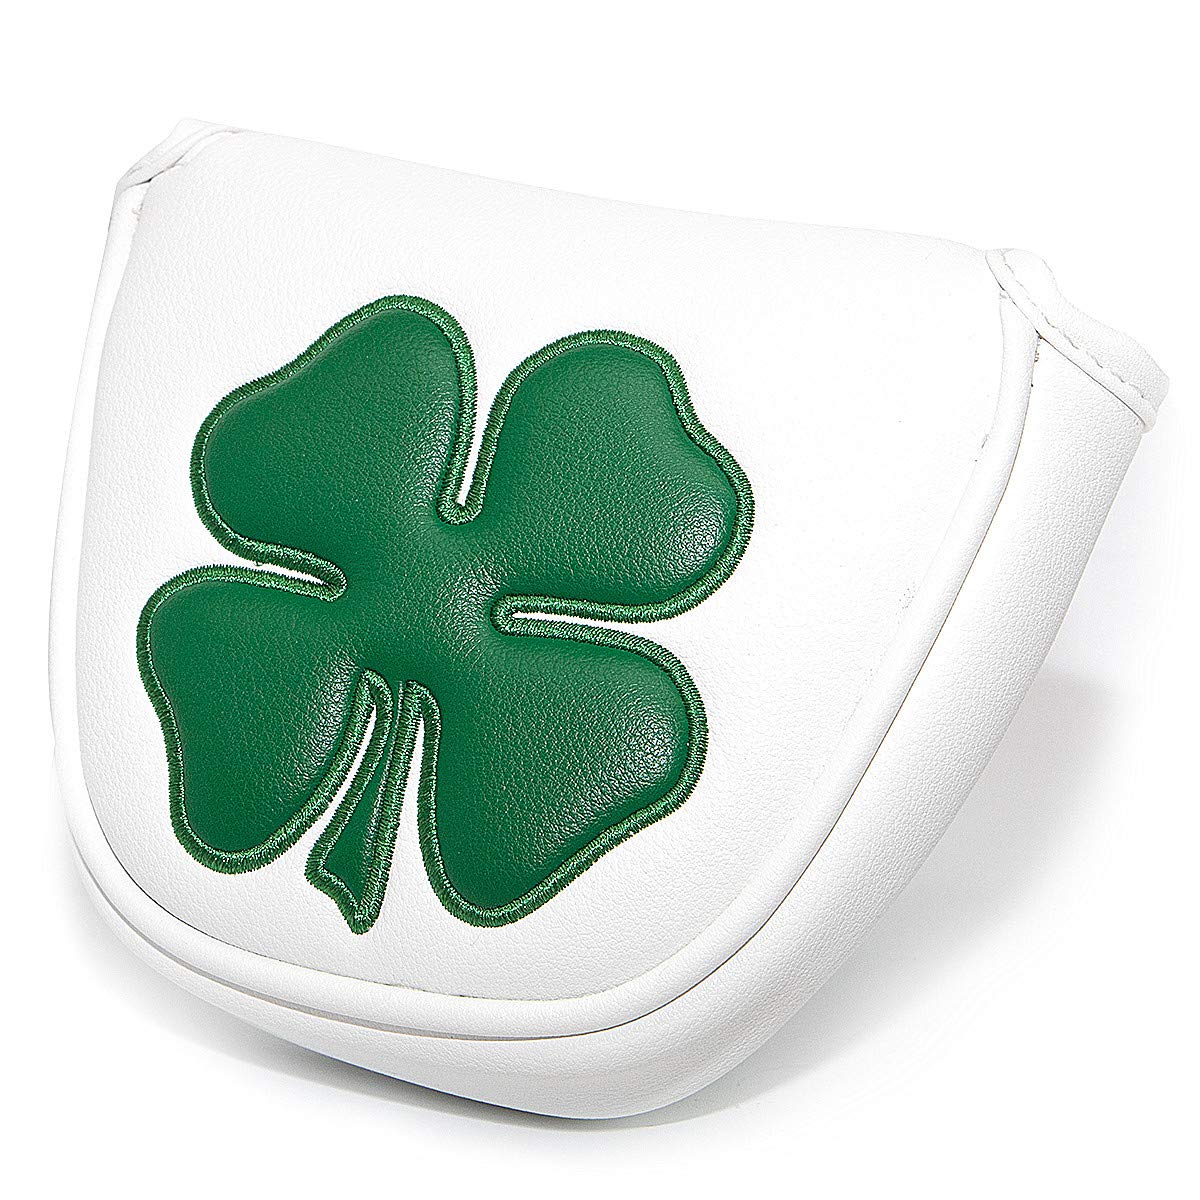 barudan golf Green White Shamrock Golf Headcover Head Covers Magnetic Mallet Putter Club Cover Protector Synthetic Leather Well Made for Odyssey 2ball Putters,Scotty Cameron,Tayormade,Ping (White)